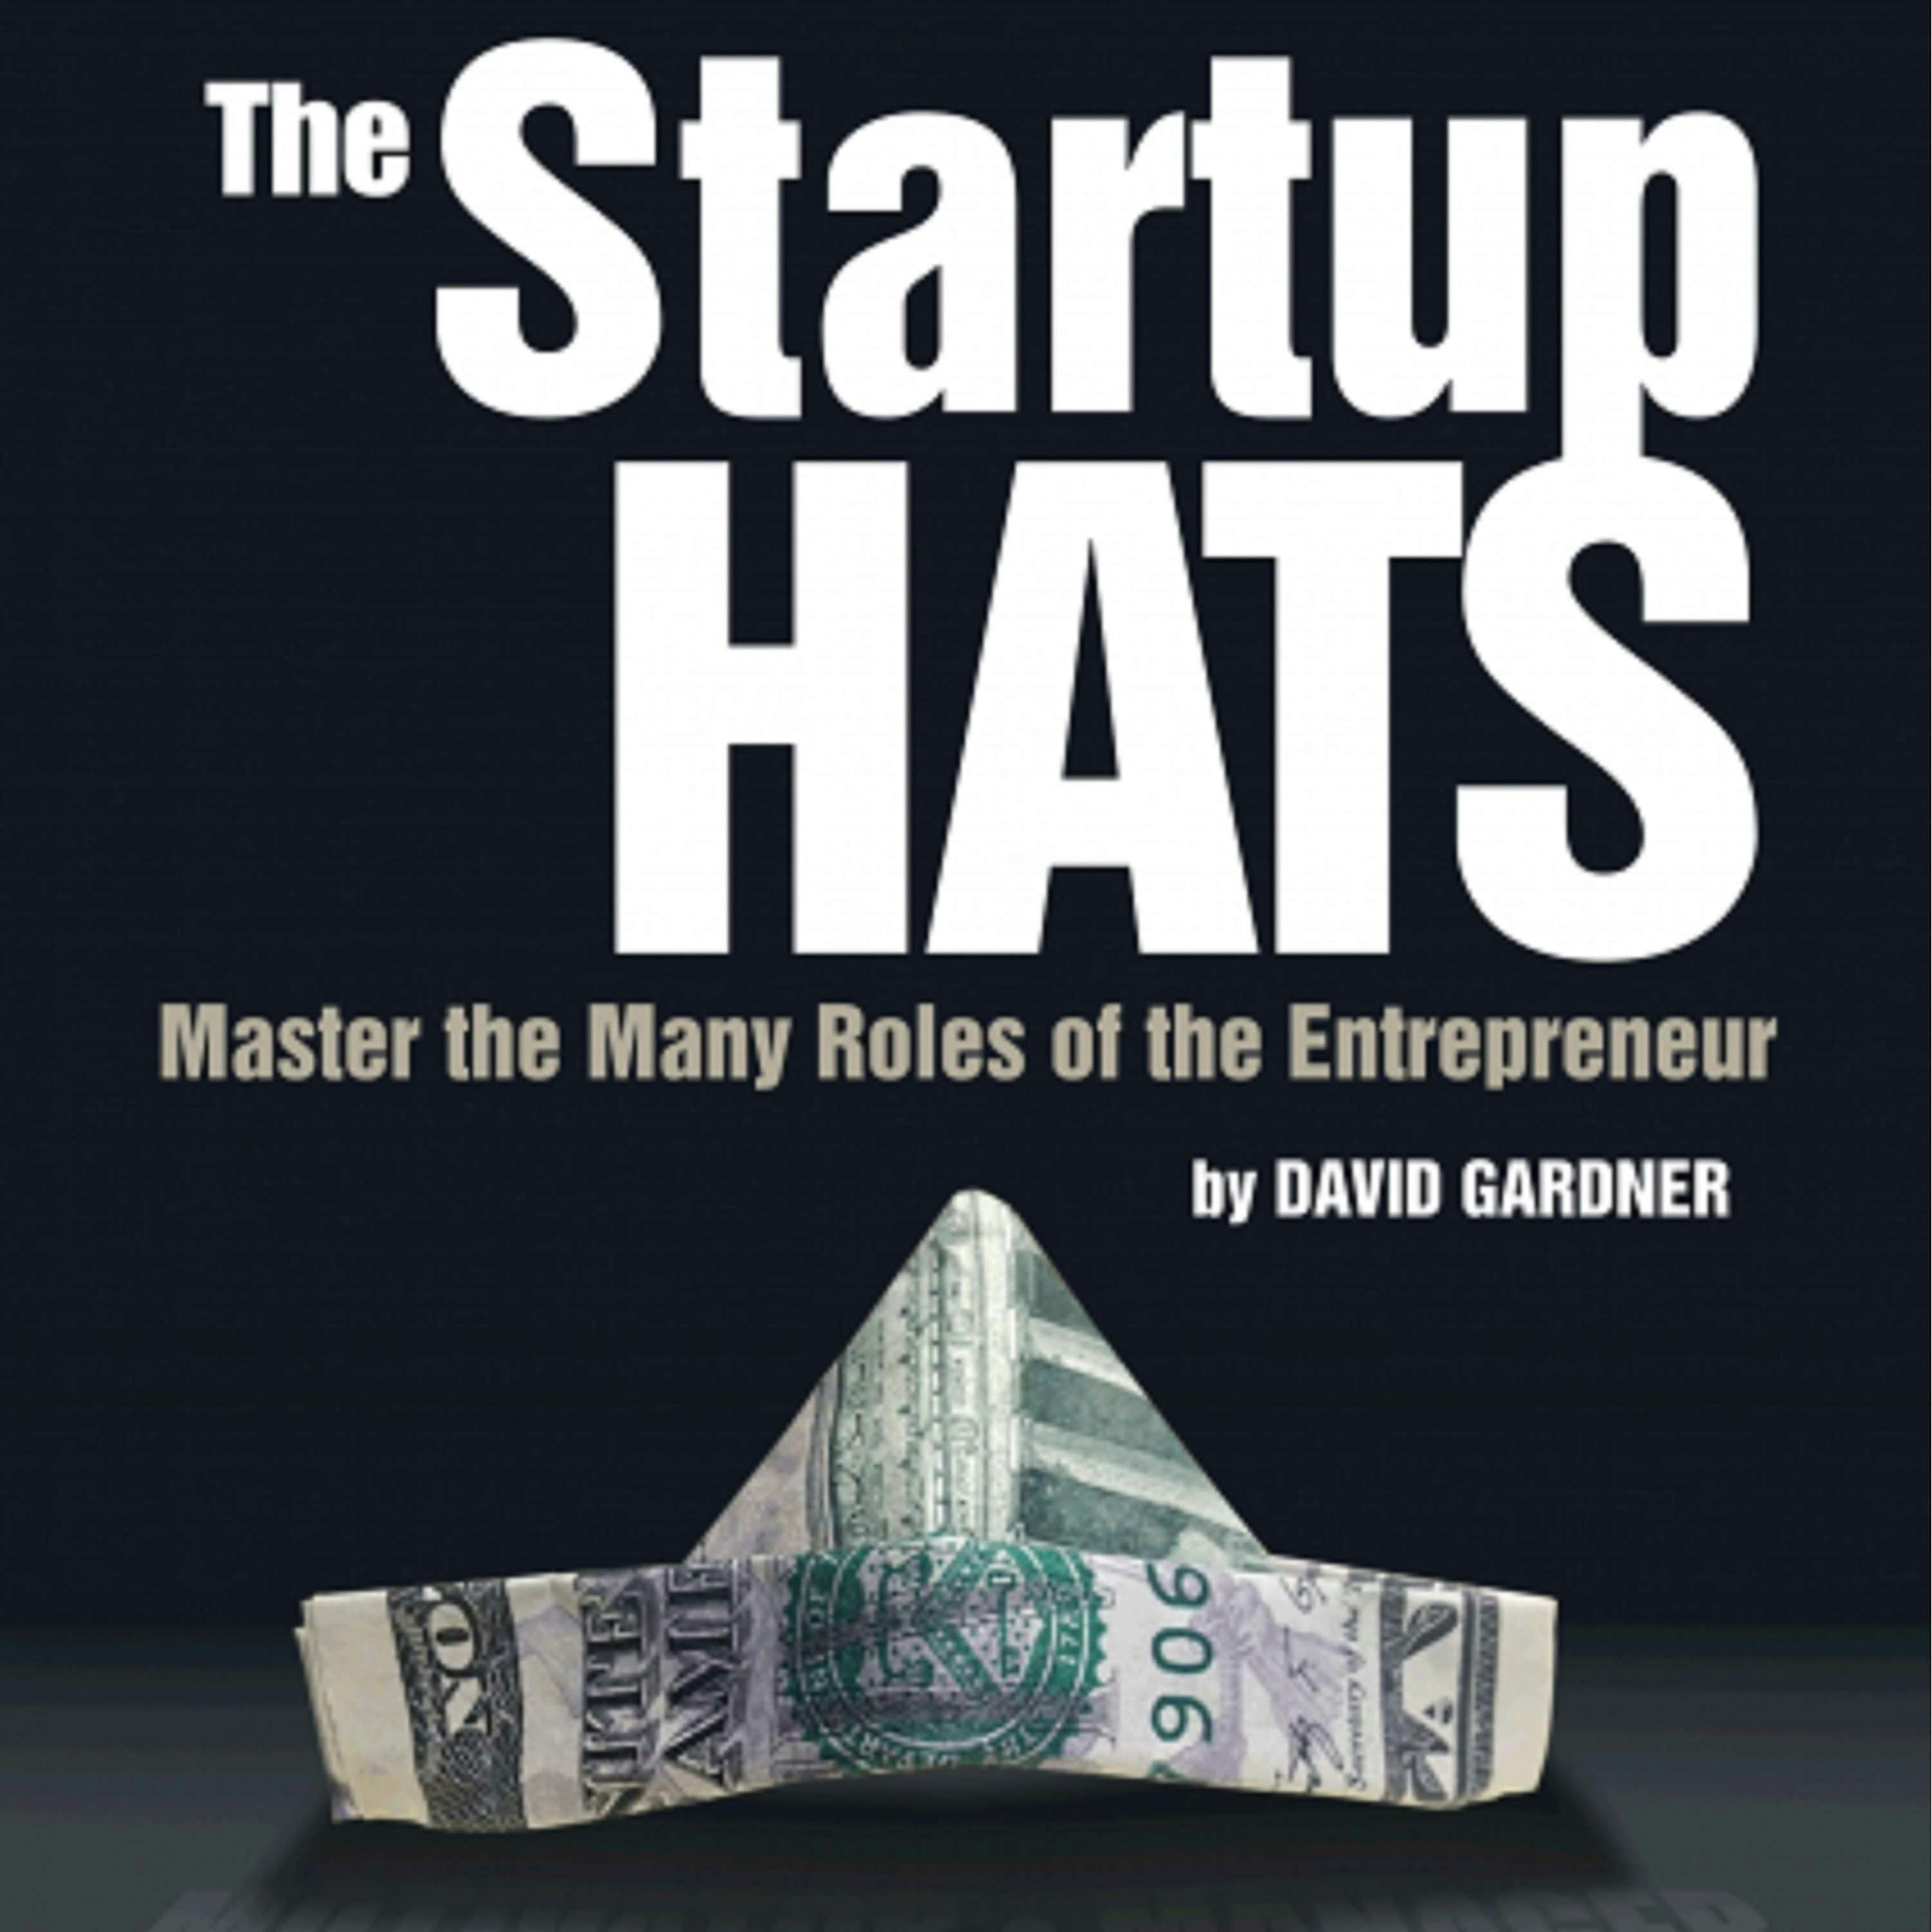 Now Available on Audiobook: The Startup Hats, by David Gardner